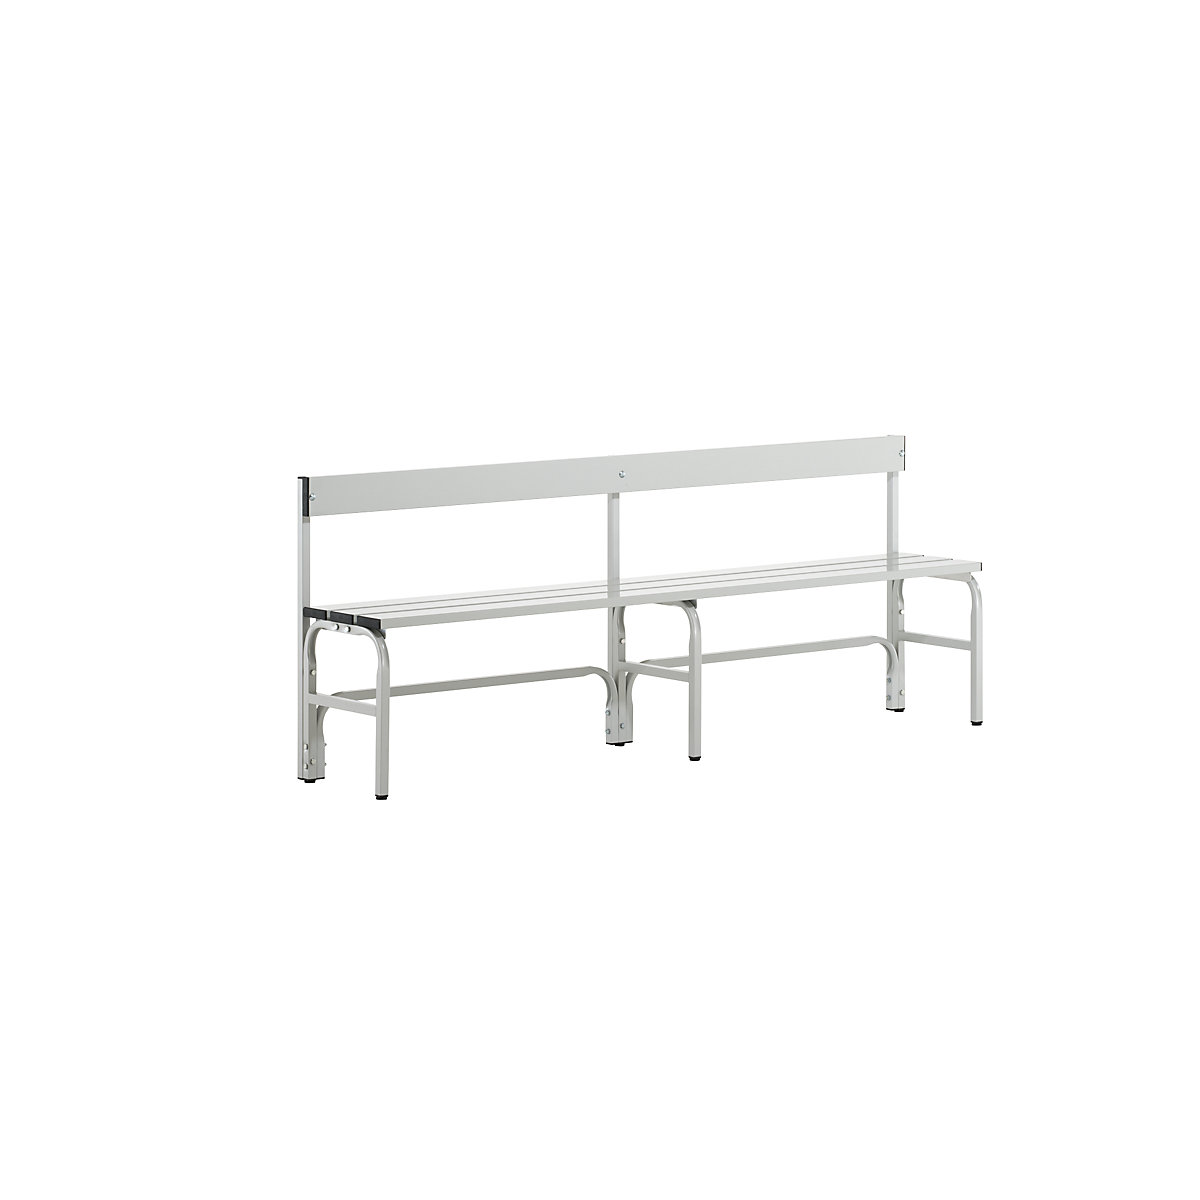 Sypro – Half height cloakroom bench with back rest, single-sided, aluminium, length 2000 mm, light grey